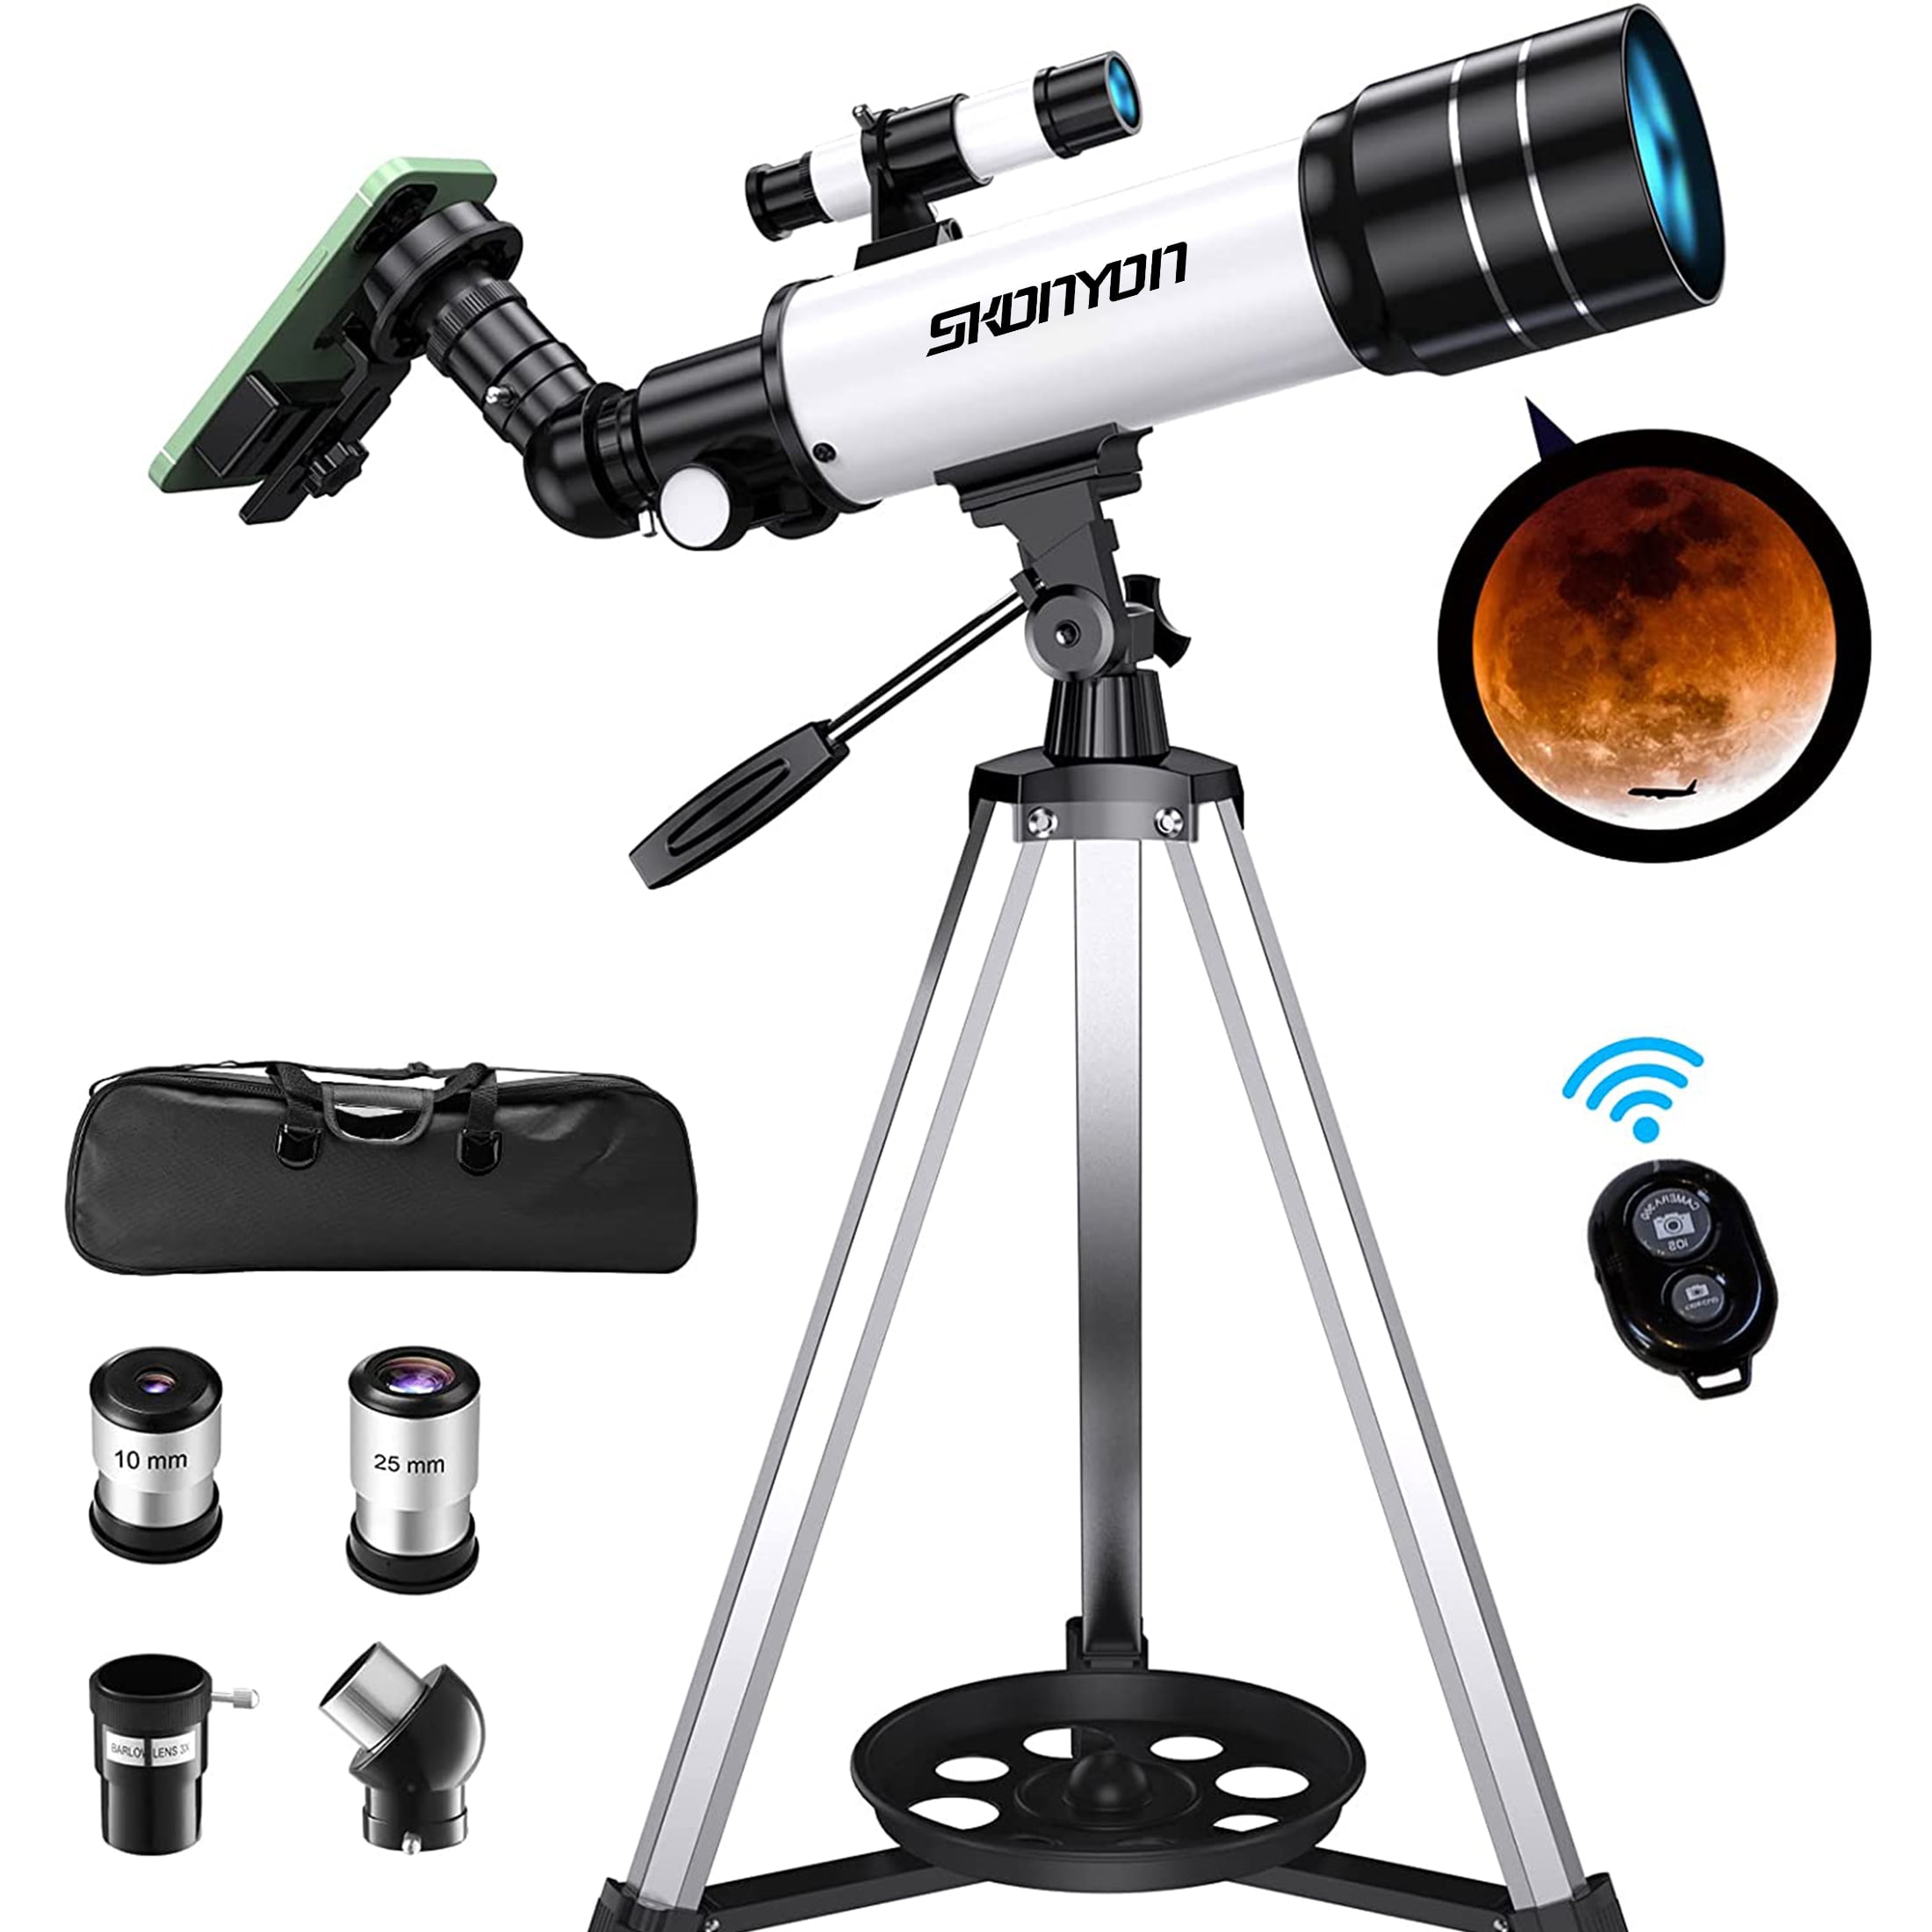 80MM Aperture 900mm Telescope for Kids Beginners and Adult,Great Astronomy Gift for Kids to Explore Moon Space 70mm Refractor Travel Telescope 